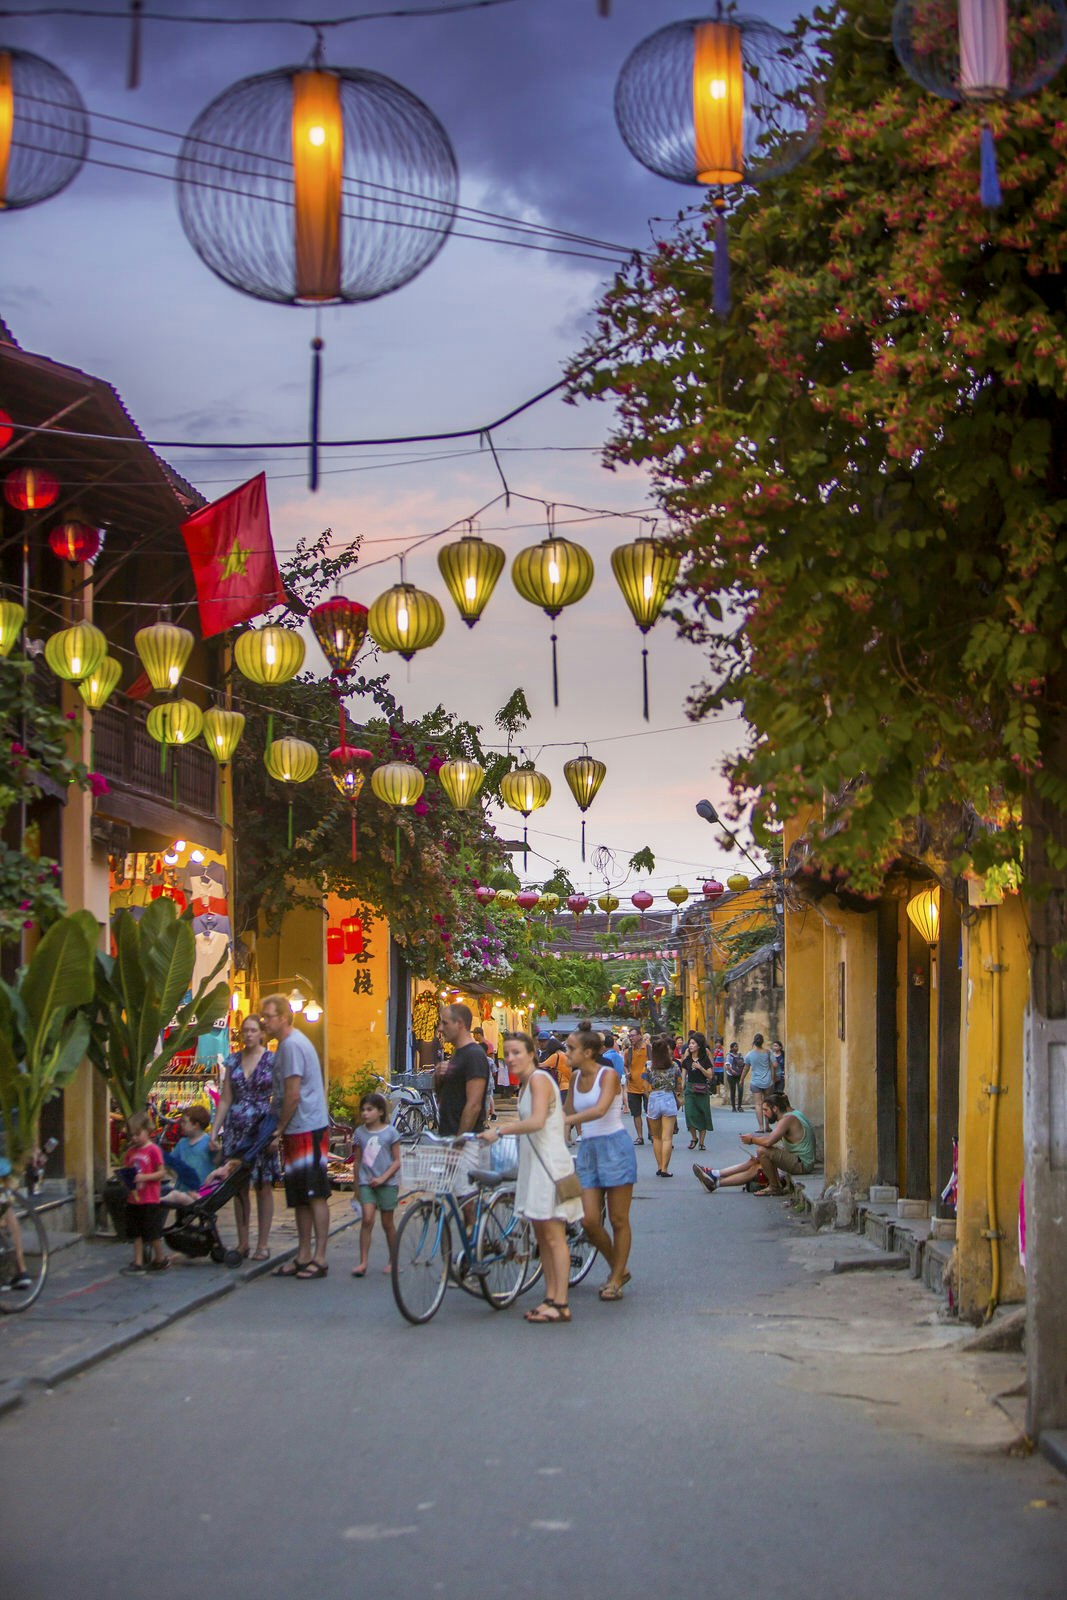 Features - June 2017 Hoi An, Vietnam - Tourists walk down the colonial streets in historic old town Hoi An. Lanterns illuminate the walkways.